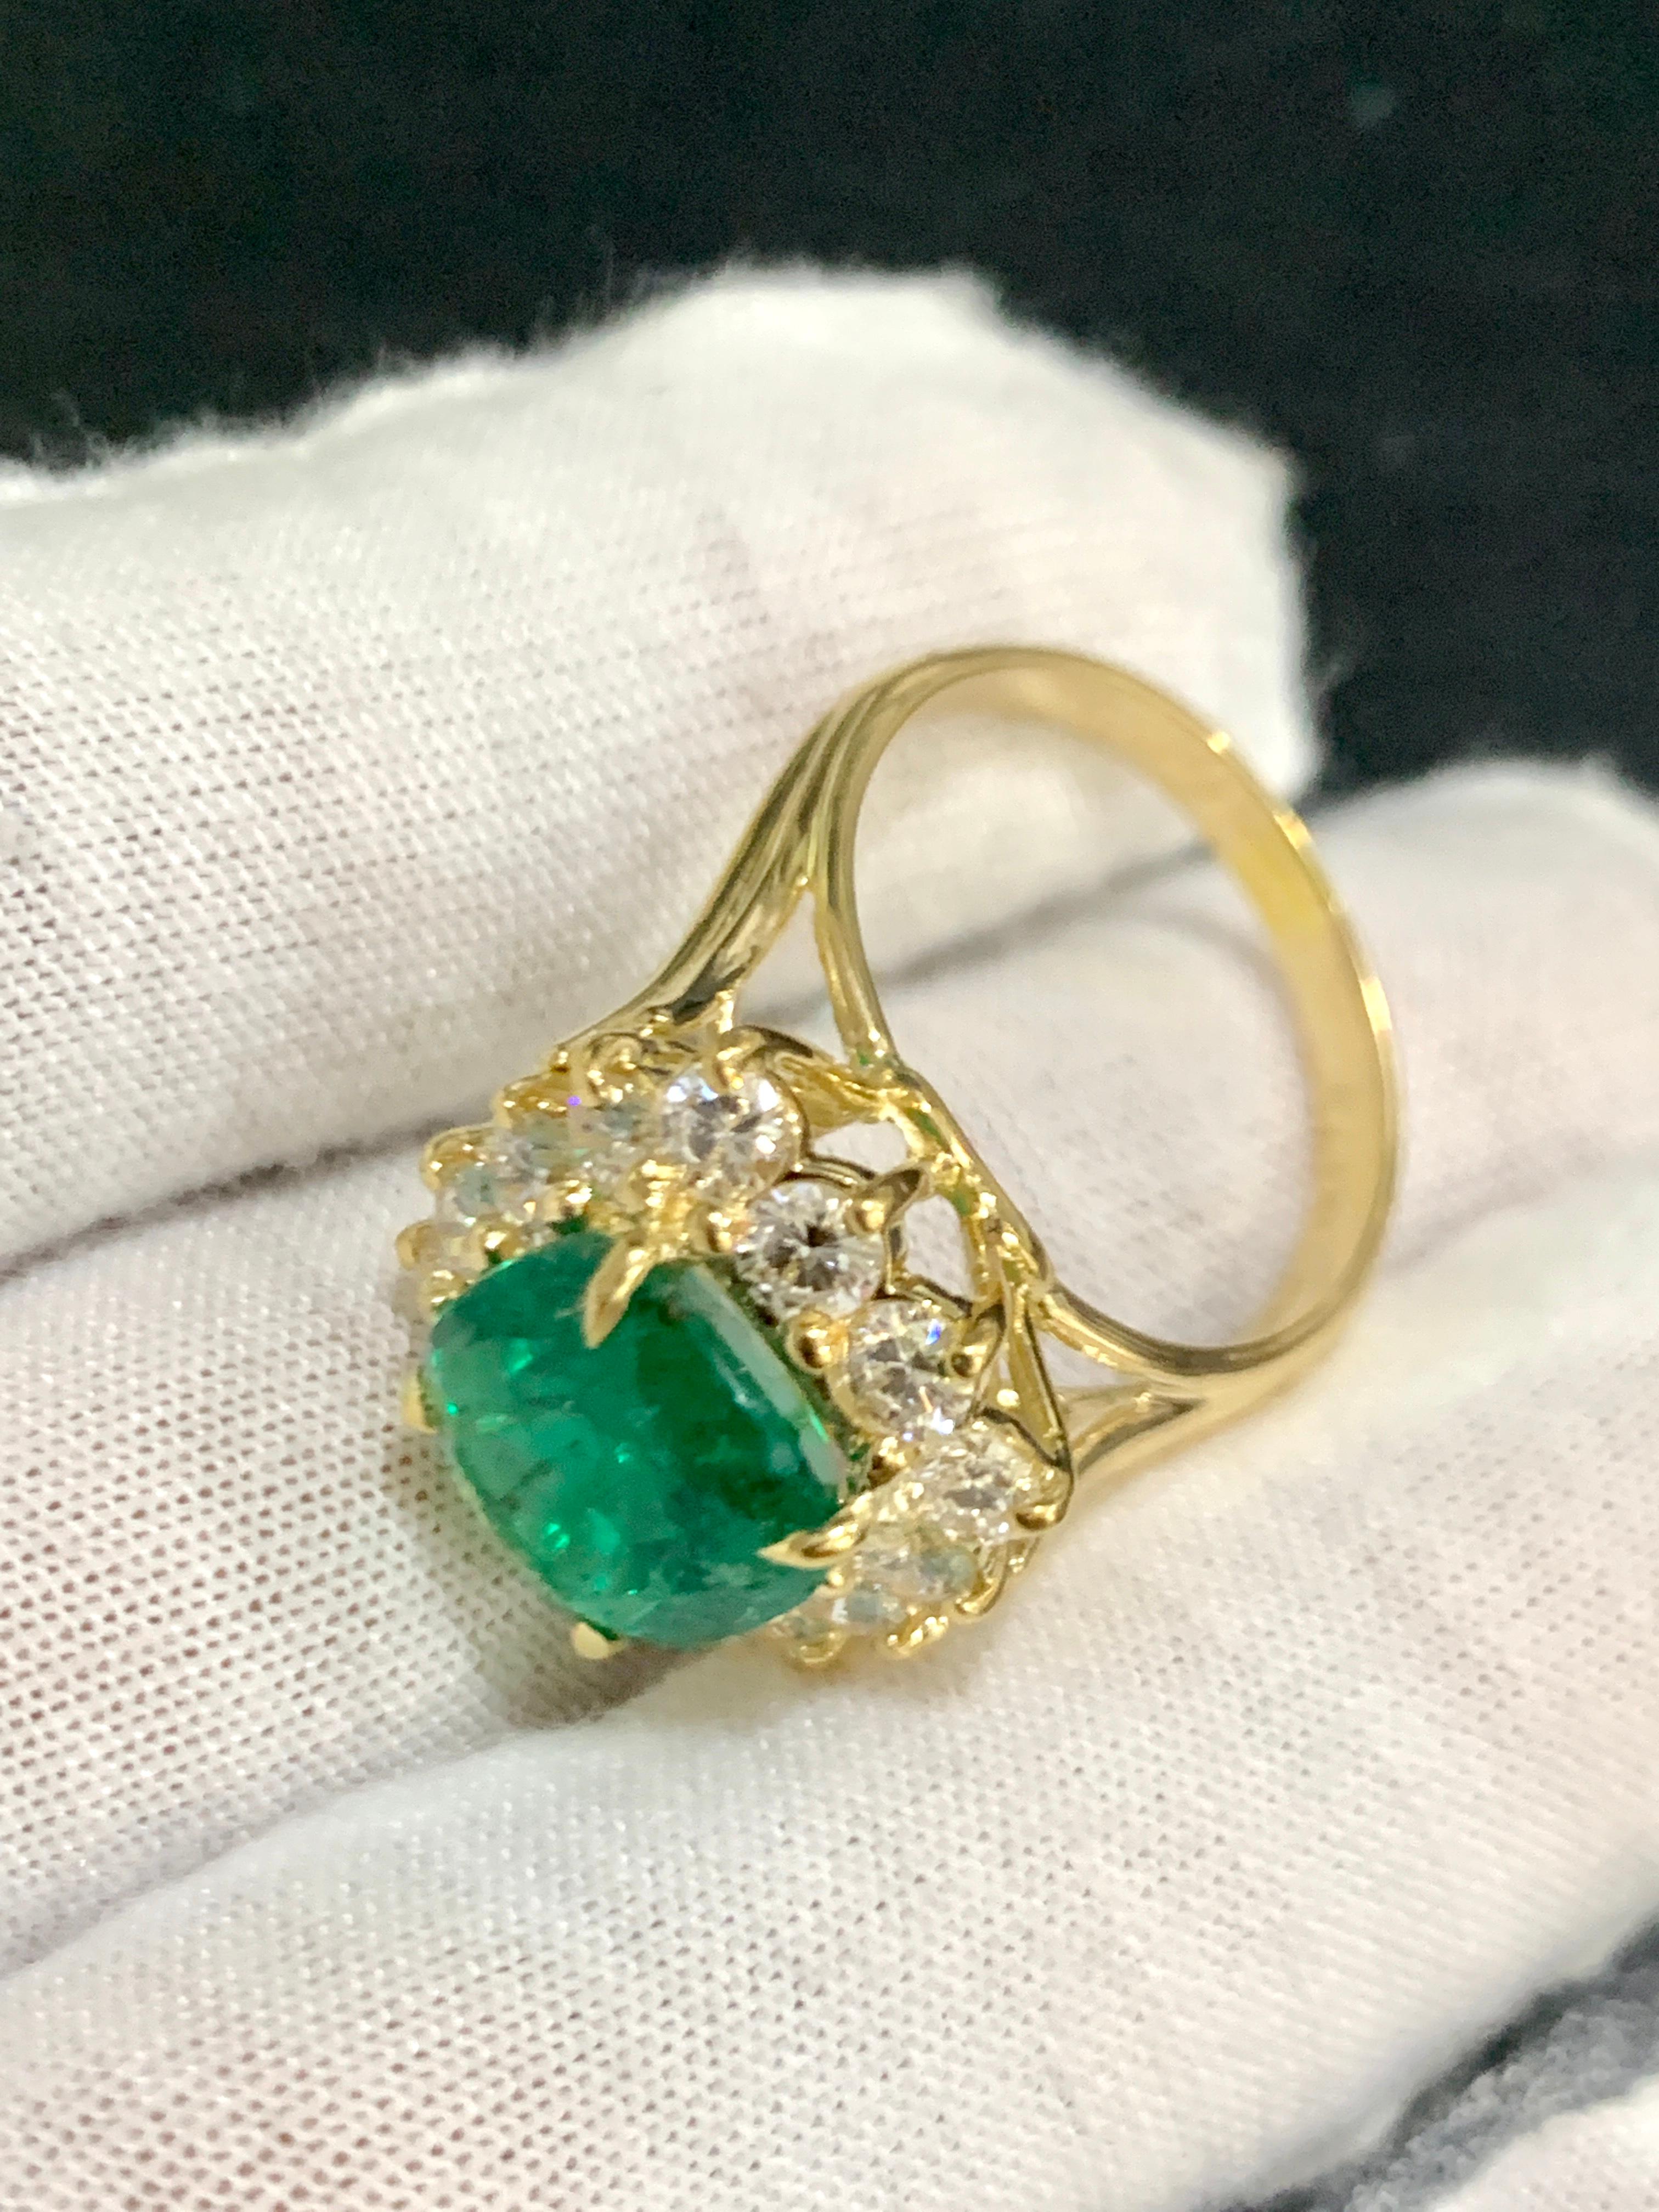 AGL Certified 4.2 Carat Cushion Cut Colombian Emerald & Diamond Ring 18K Y Gold For Sale 2